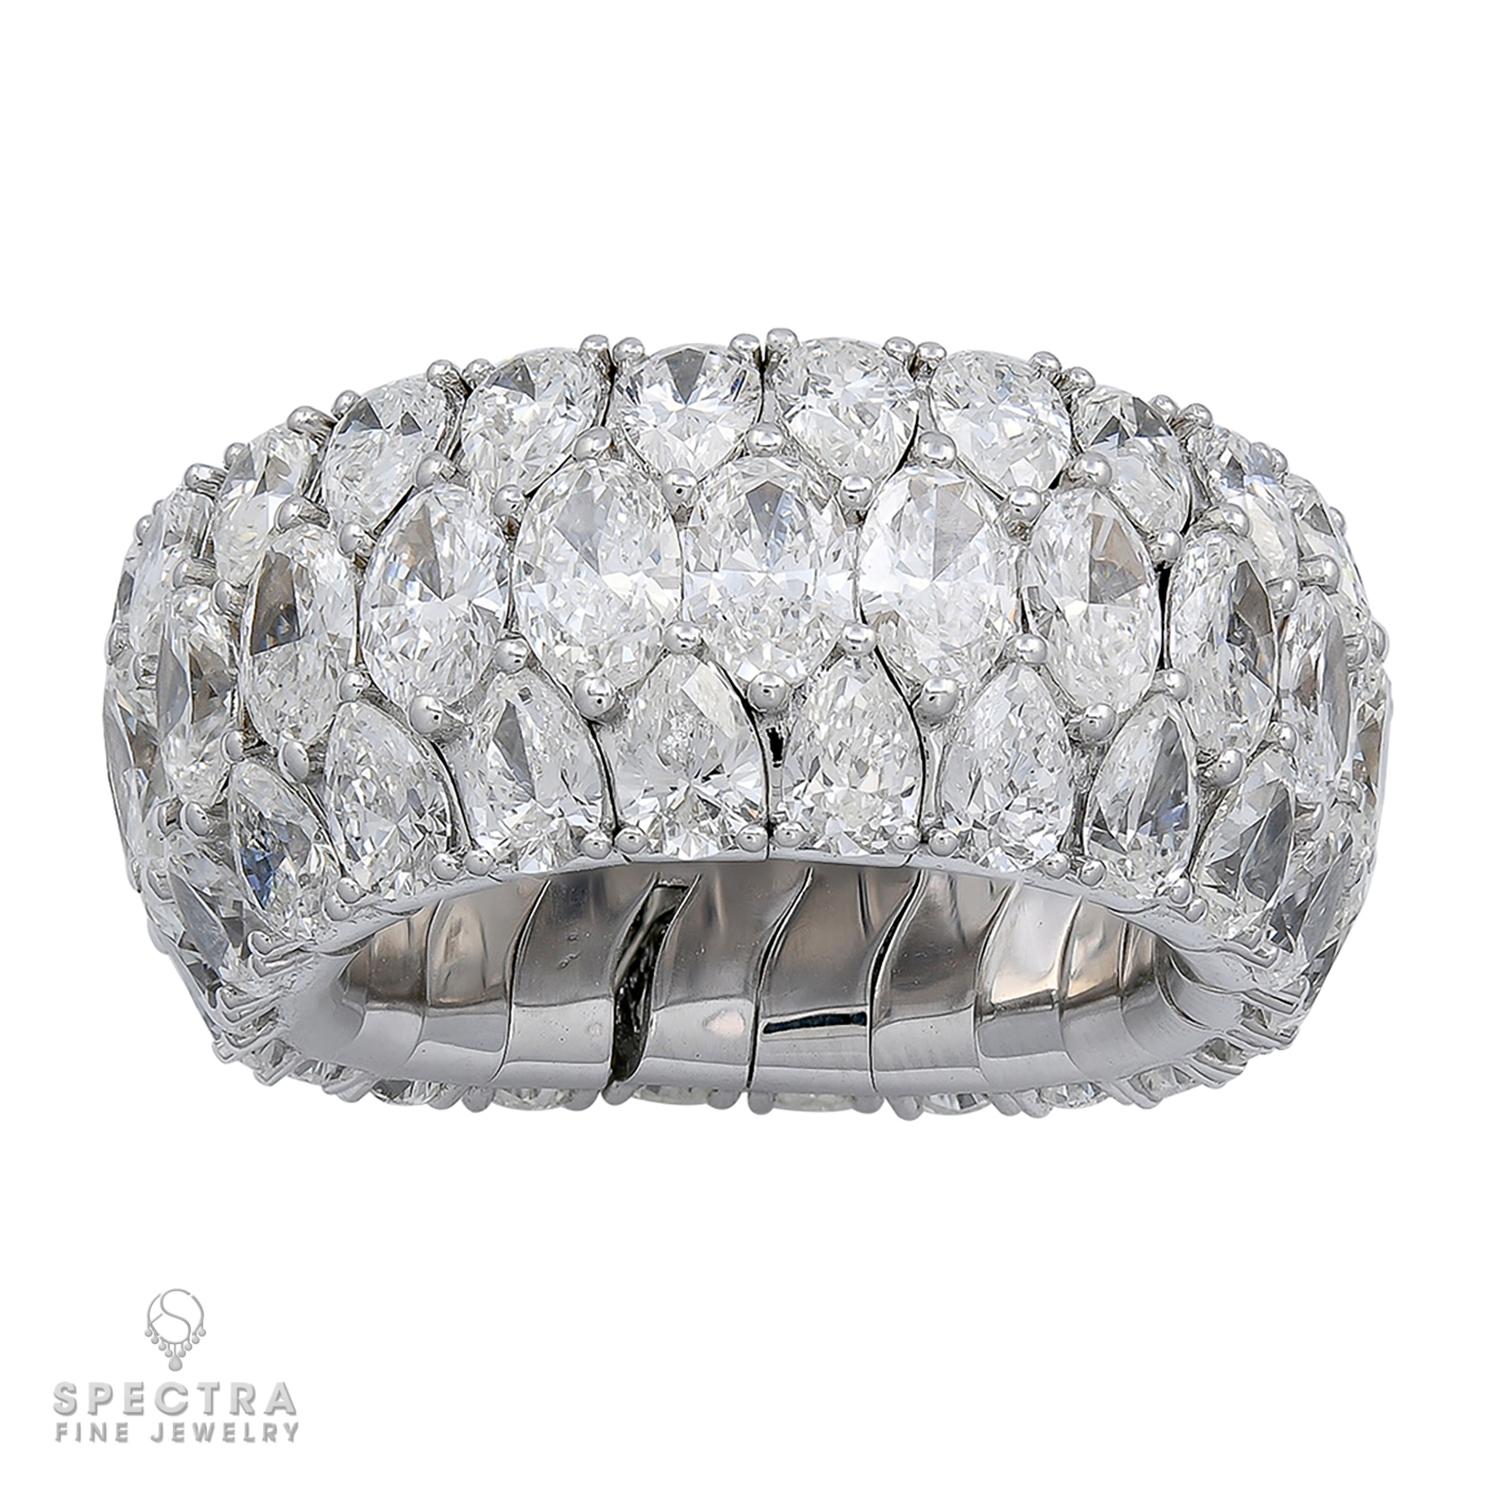 A unique piece of jewelry, designed as a flexible band ring. No need to adjust size.
The ring is featuring marquise and pear shape diamonds, weighing a total of 10.64 carats.
The diamonds are mostly with F-G color, VS clarity.
Metal is 18k white